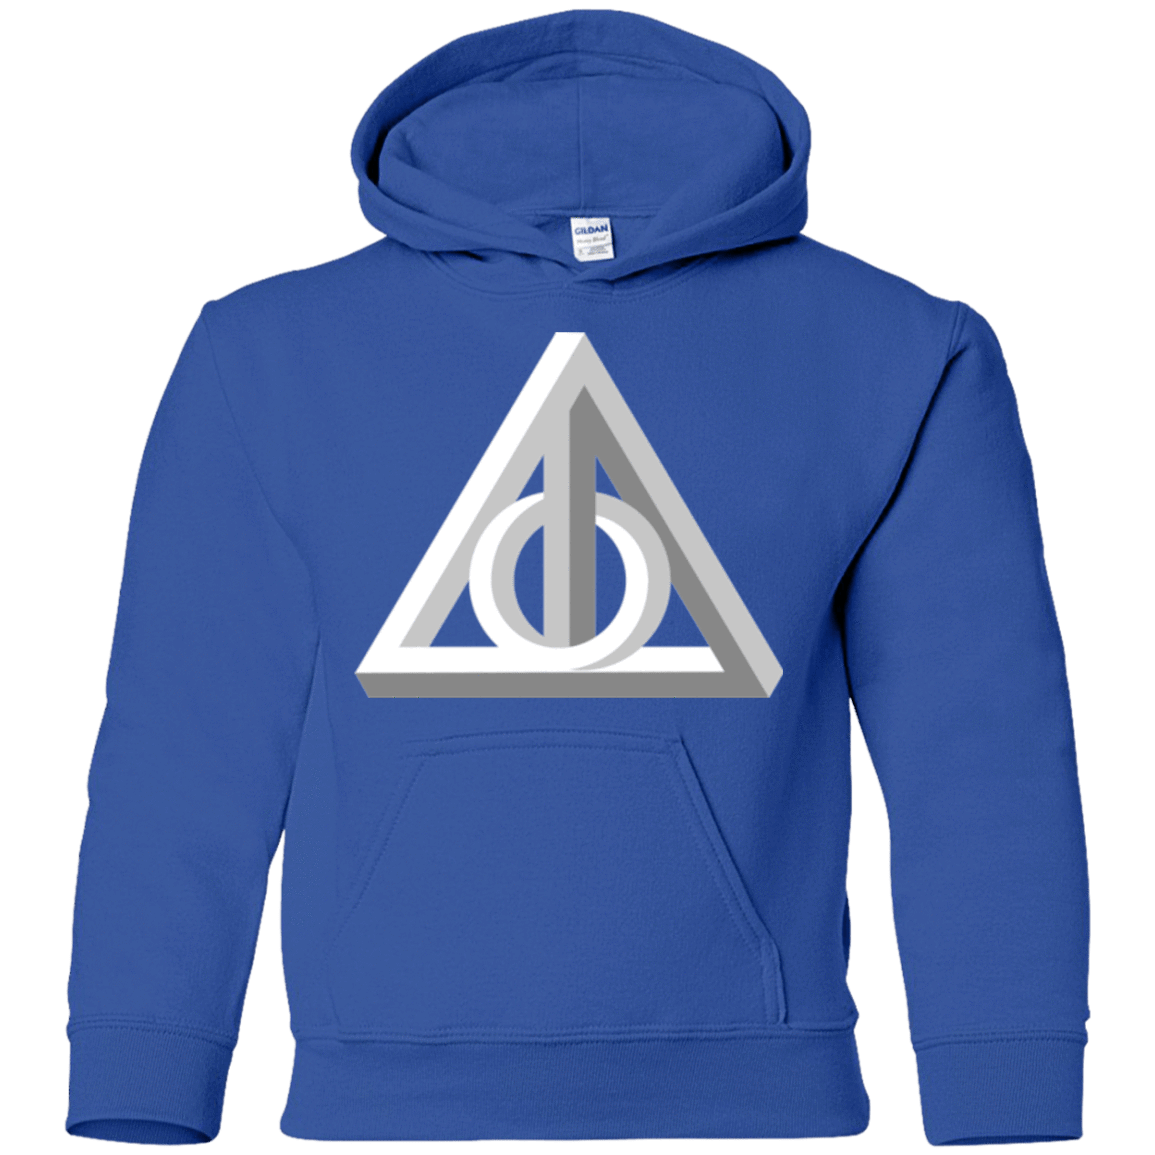 Sweatshirts Royal / YS Deathly Impossible Hallows Youth Hoodie